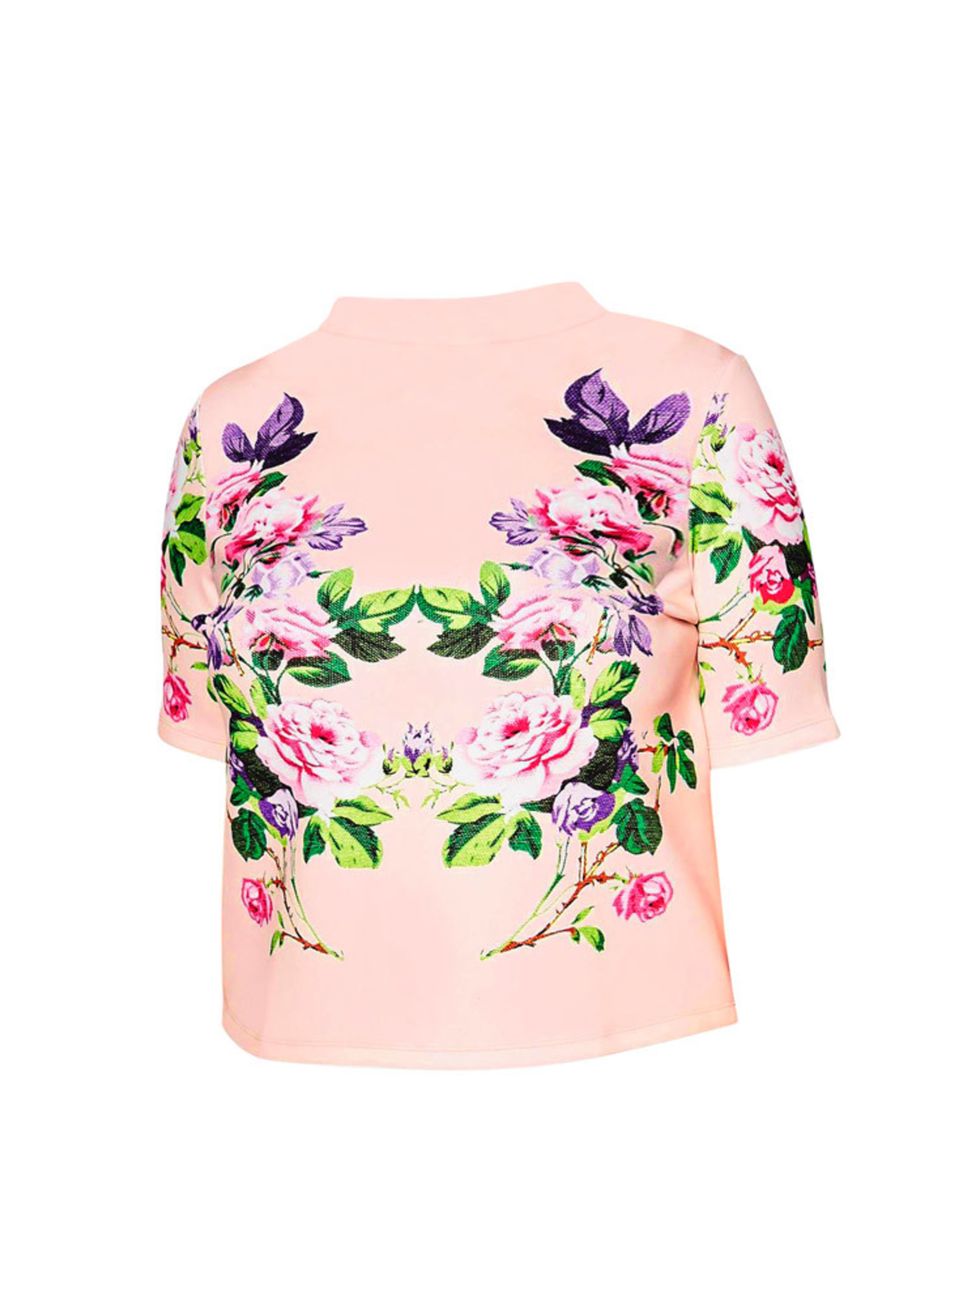 <p><a href="http://www.asos.com/ASOS-Curve/ASOS-CURVE-High-Neck-Top-With-Floral-Placement-Print/Prod/pgeproduct.aspx?iid=4956315&WT.ac=rec_viewed&CTAref=Recently+Viewed" target="_blank">ASOS Curve</a> Floral High Neck Top, £25</p>